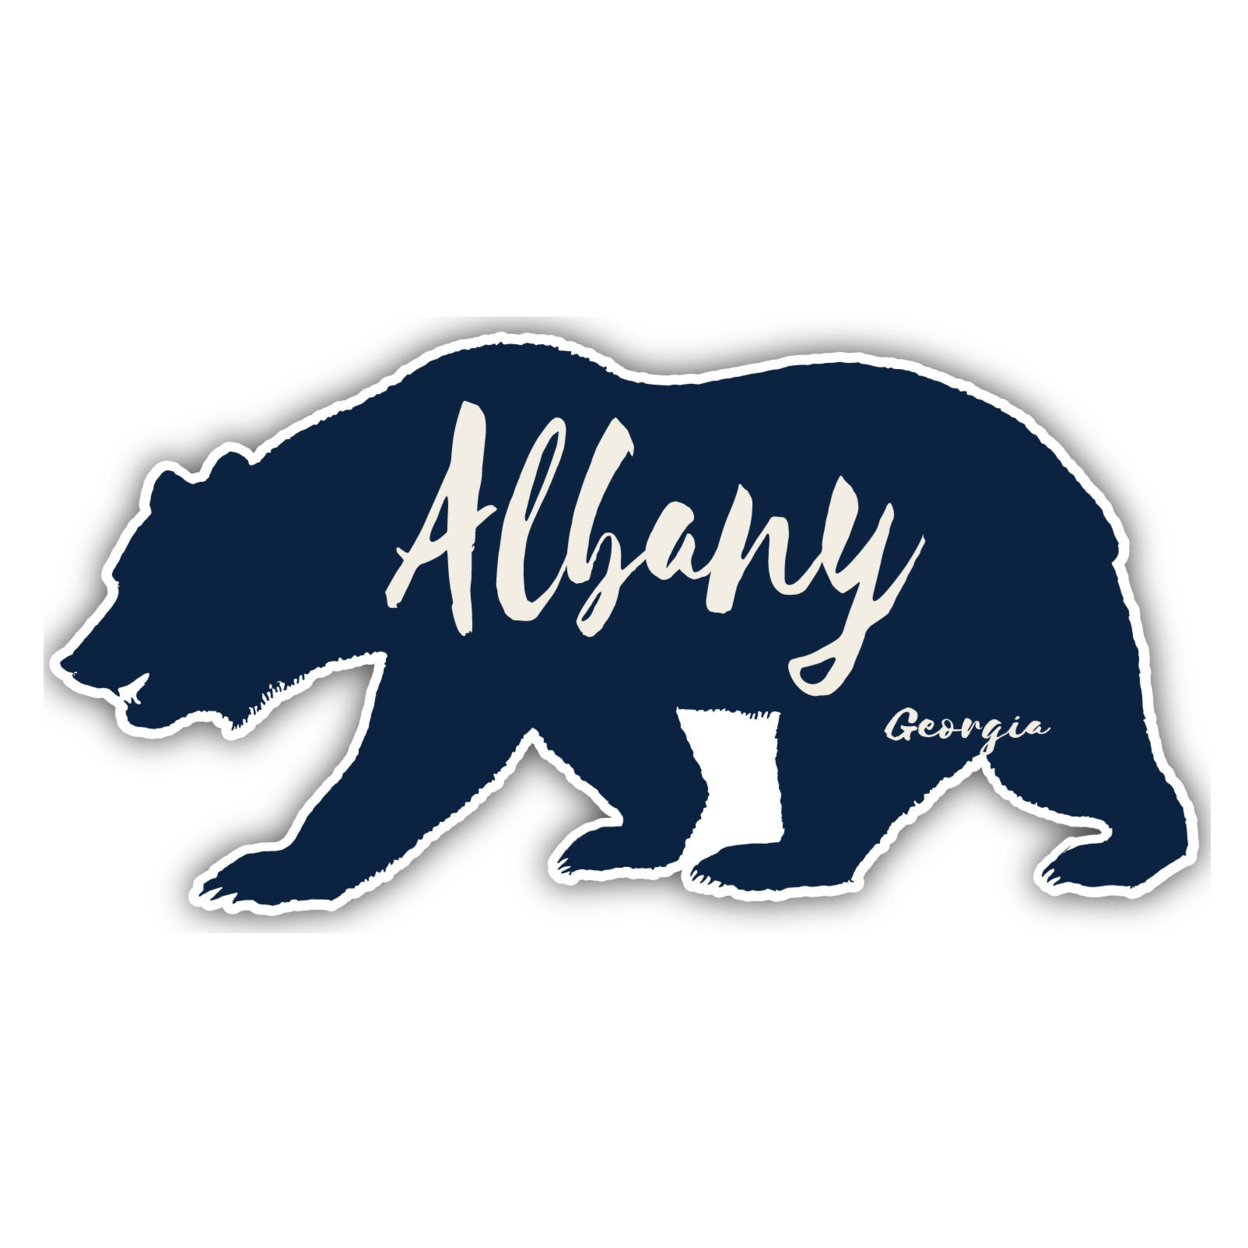 Albany Georgia Souvenir Decorative Stickers (Choose Theme And Size) - 4-Pack, 2-Inch, Camp Life